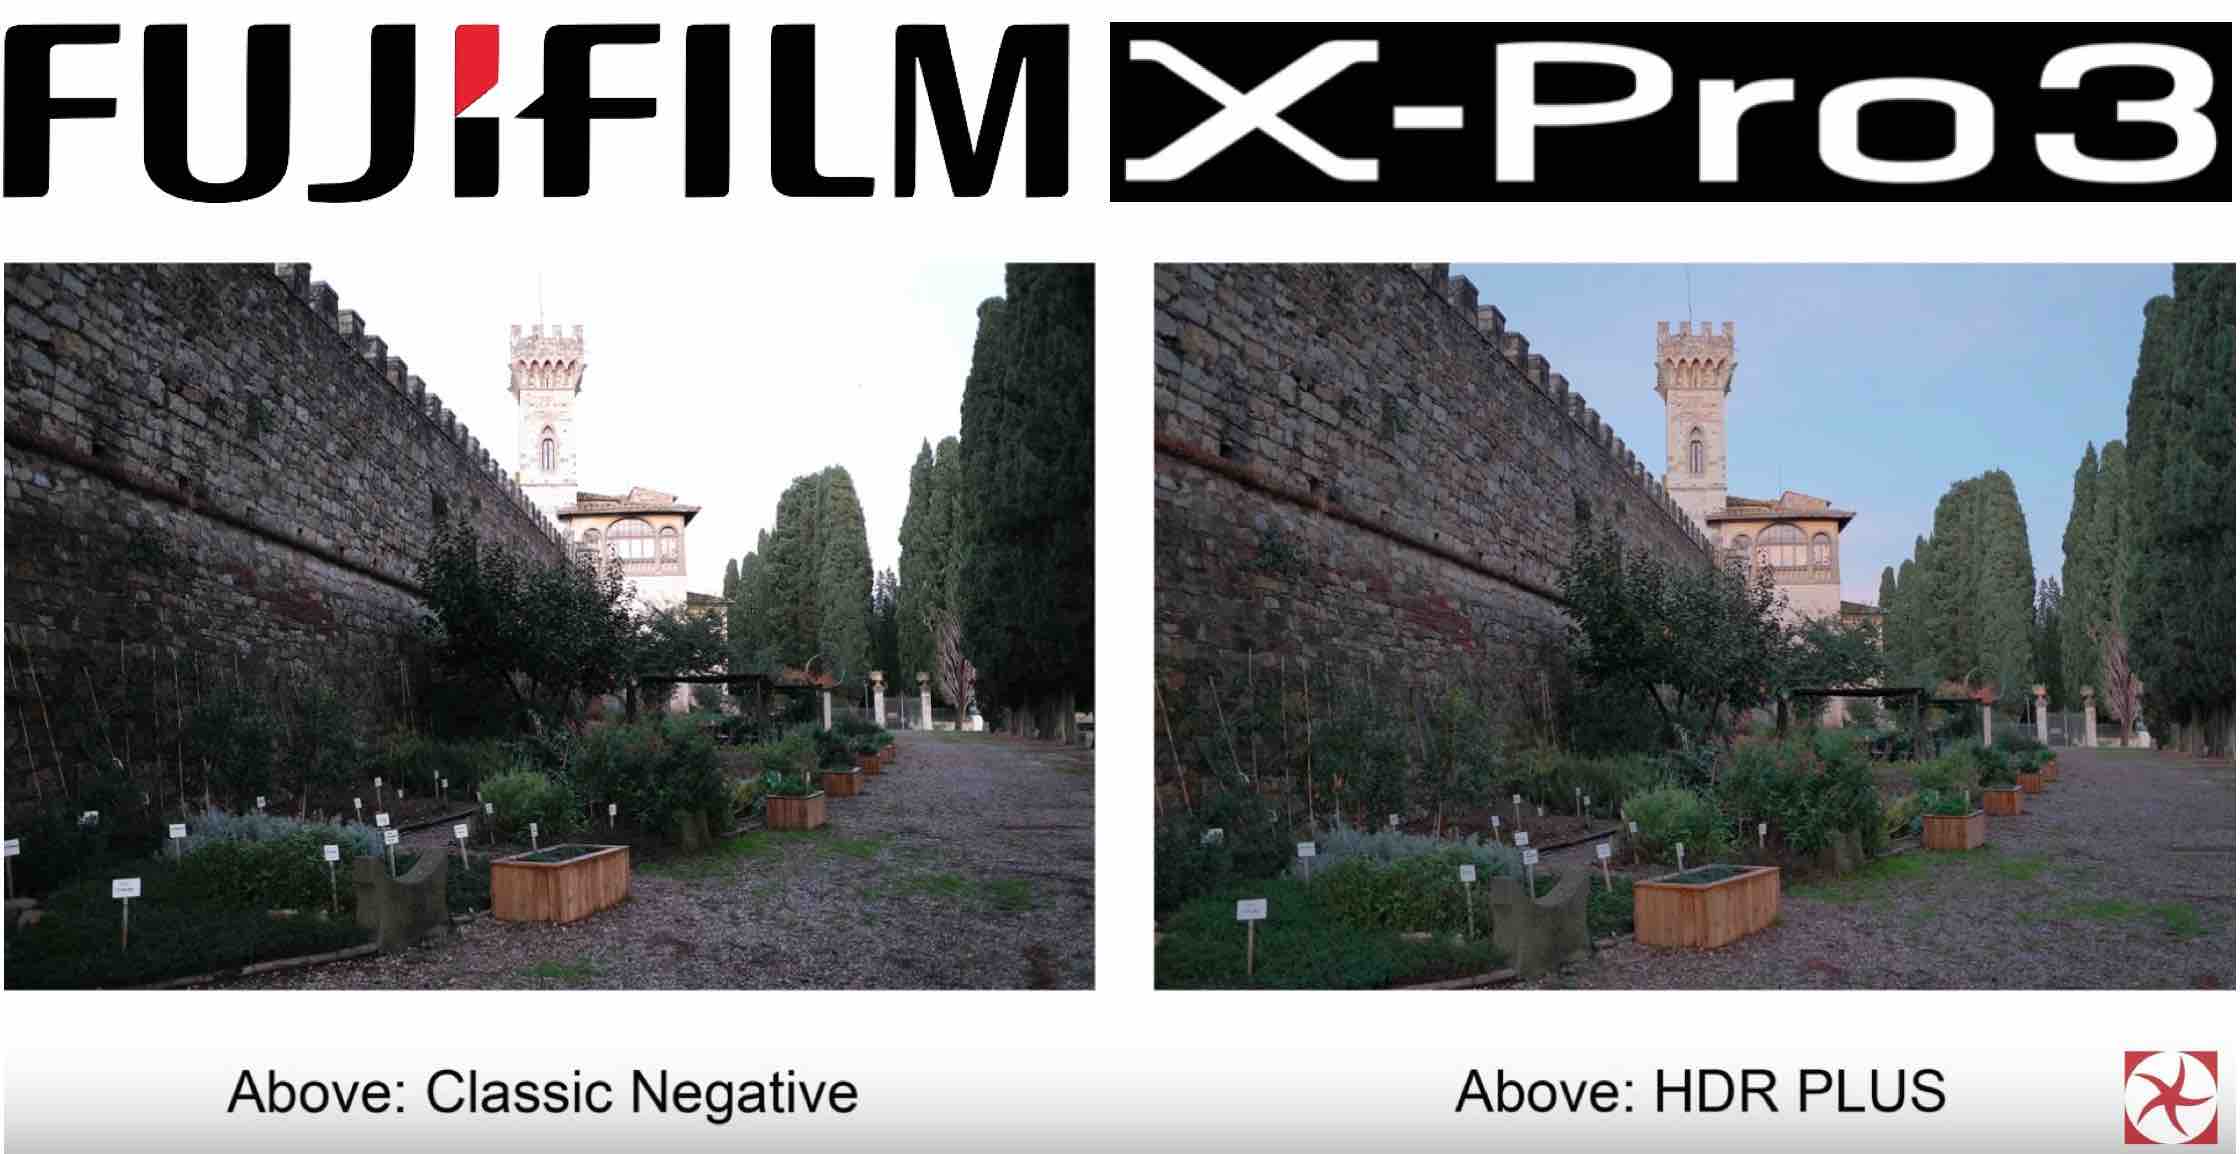 Fujifilm X-Pro3 Reviews: HDR Plus Sample Images and Enjoying the ...